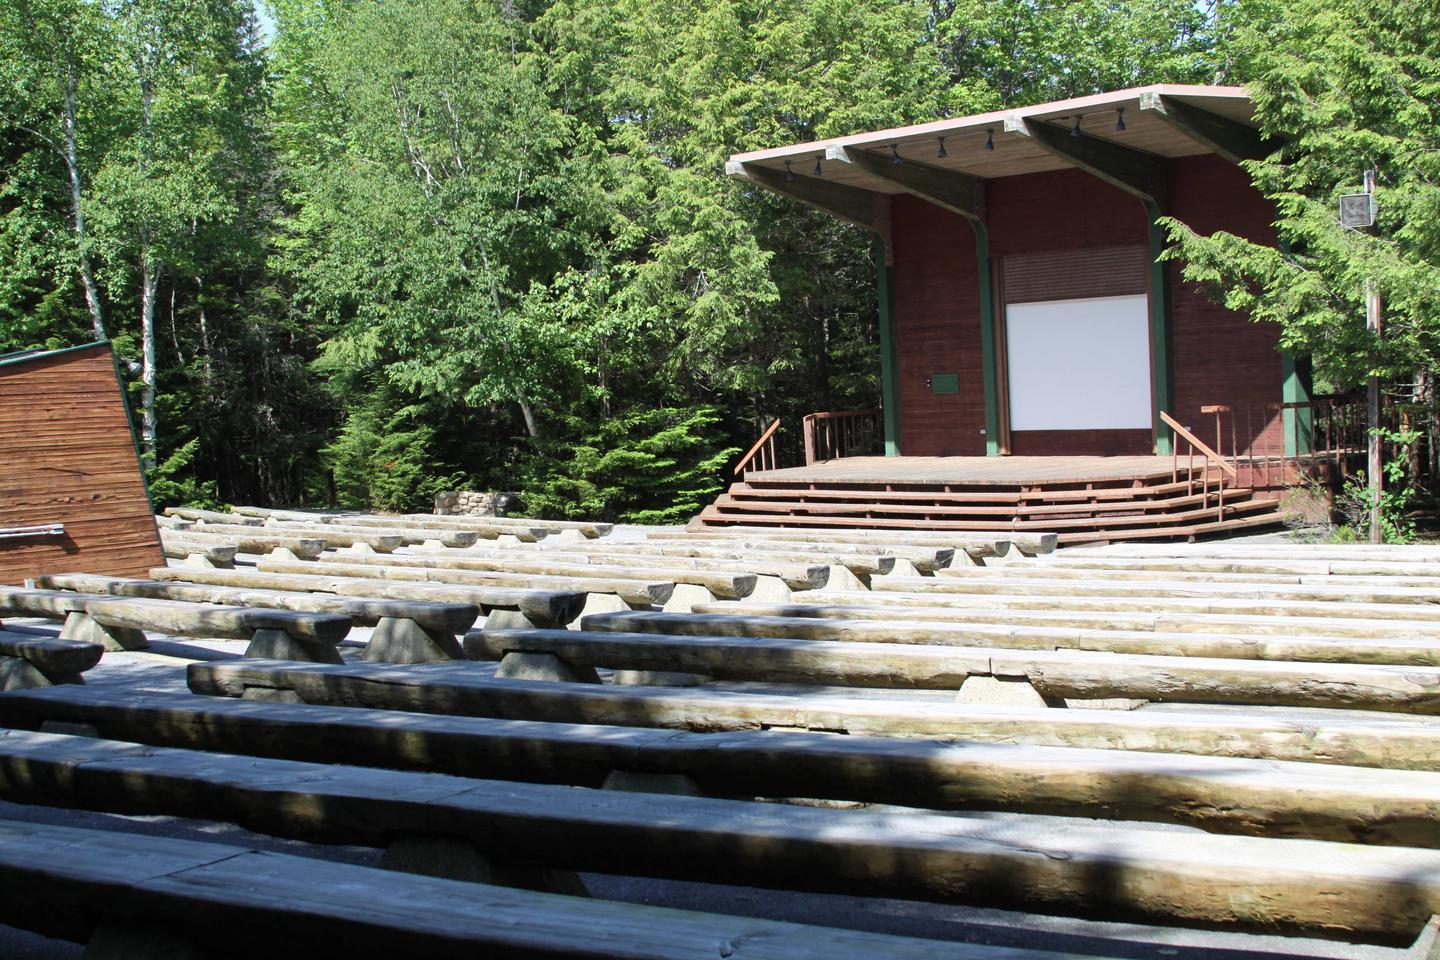 Wooden amphitheater stage with wooden benches